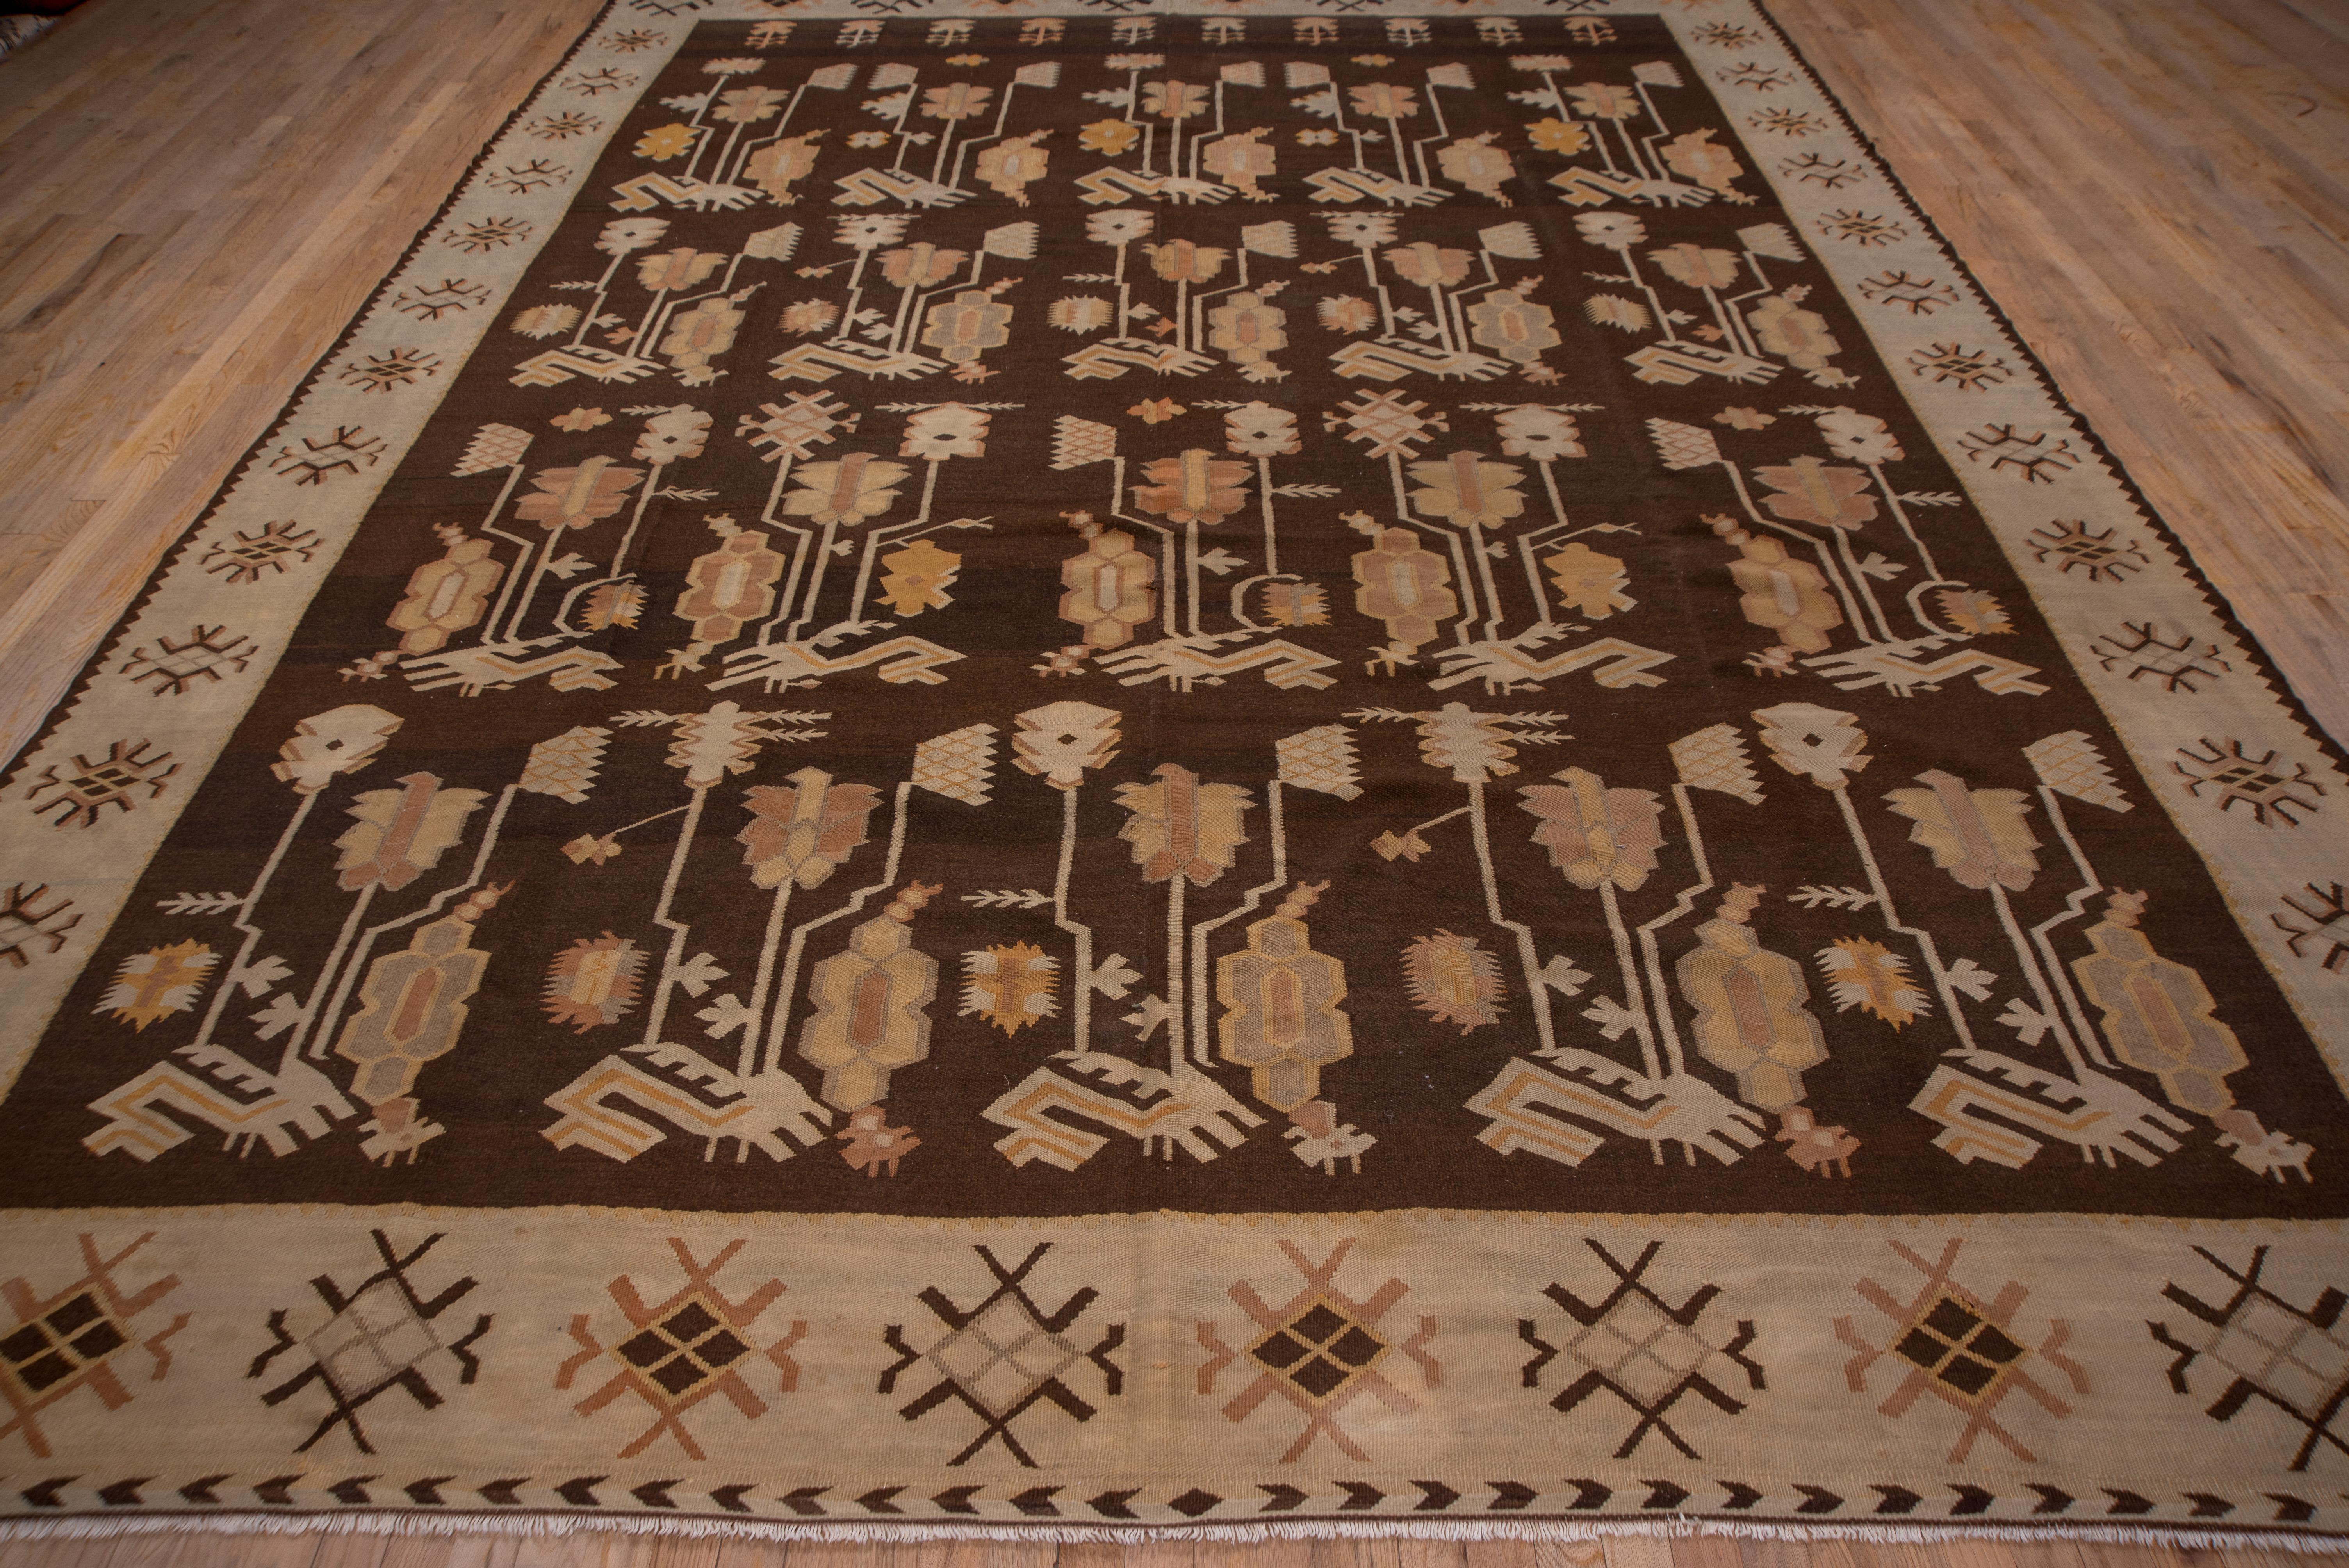 Early 20th Century 1920s Antique Turkish Kilim Rug, Allover Brown Field, Cream Borders For Sale